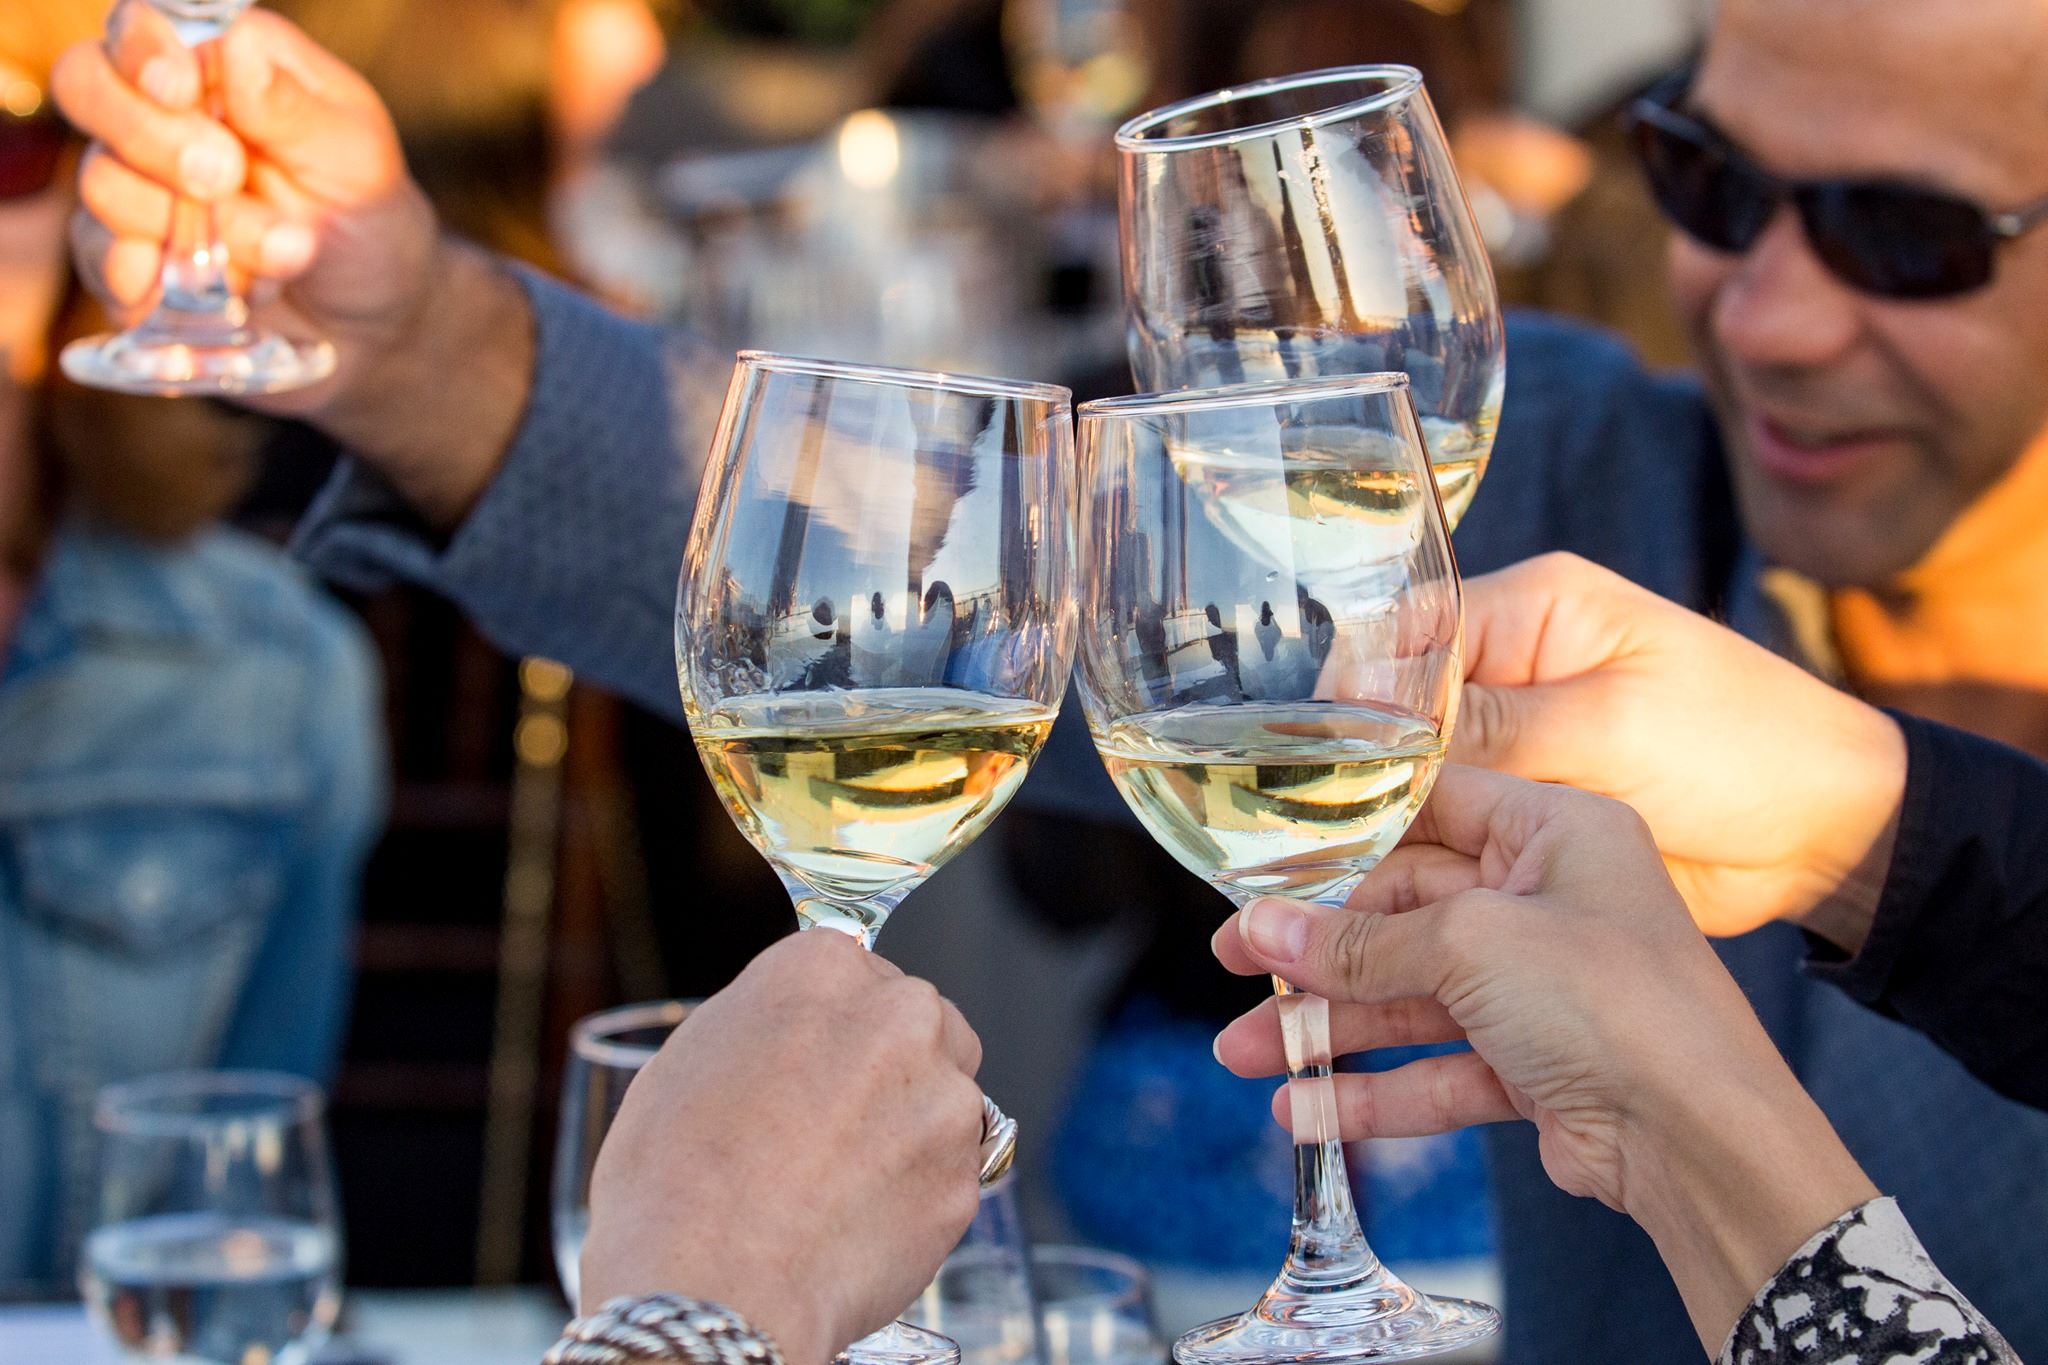 An image of people holding wine glasses at last year's "A Culinary Evening with the California Winemasters" event.